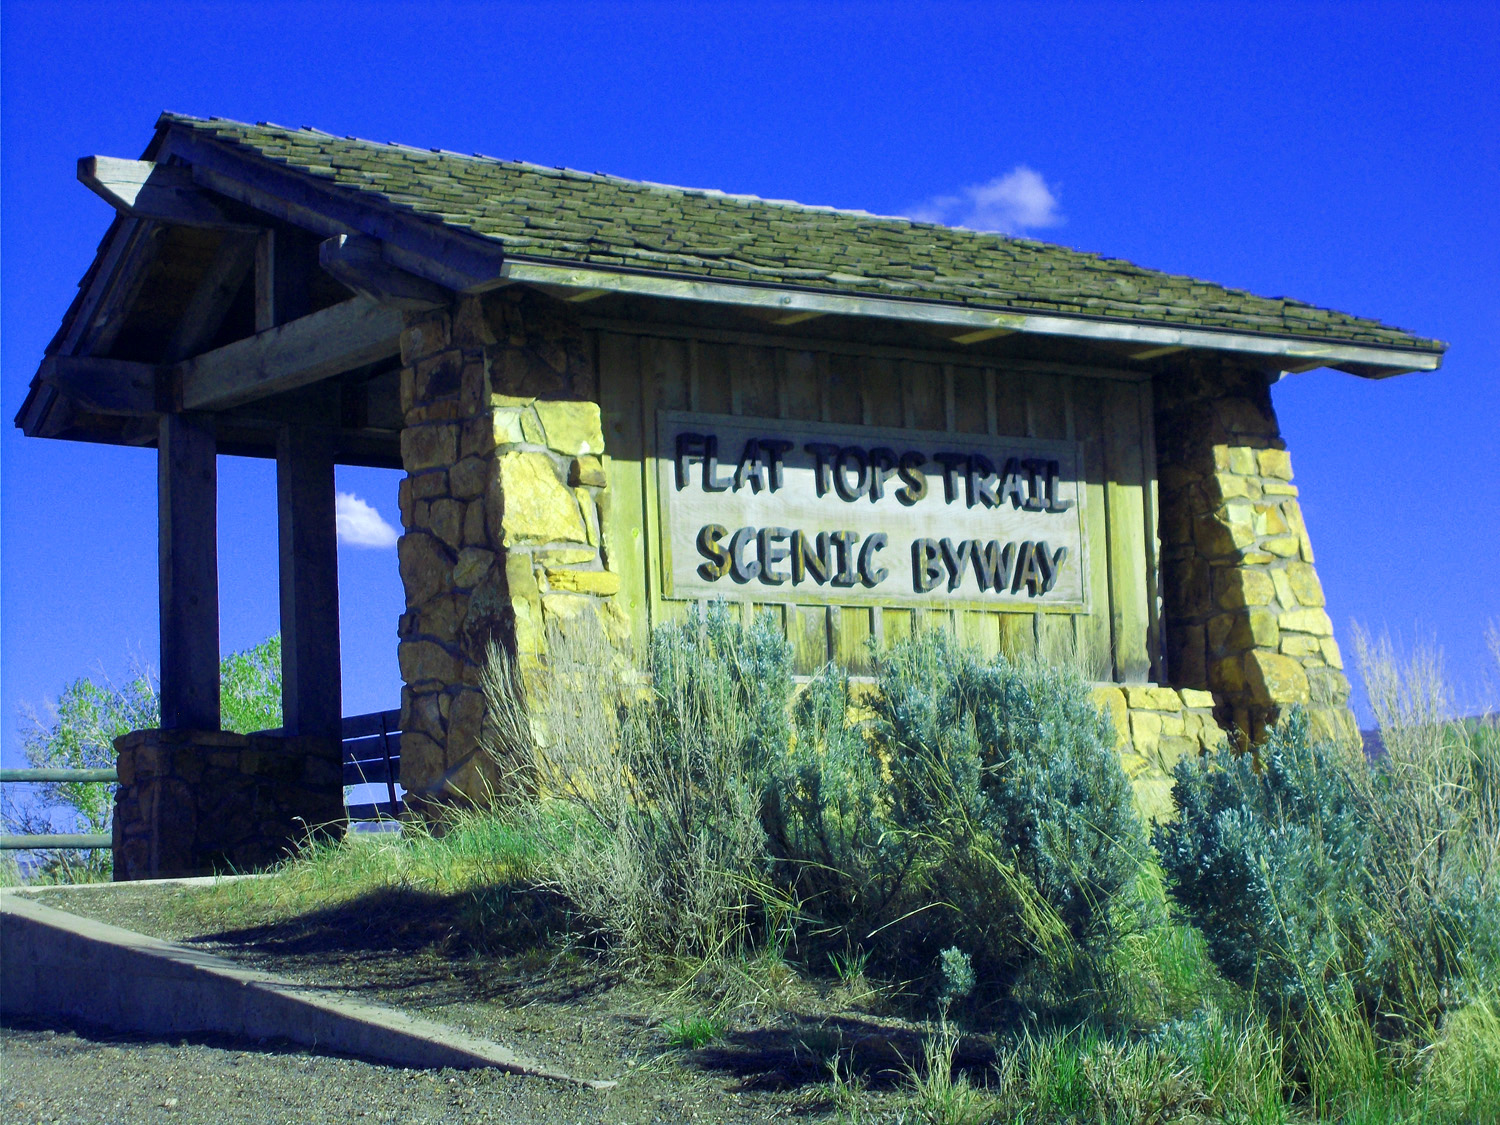 Flat Tops Scenic Byway